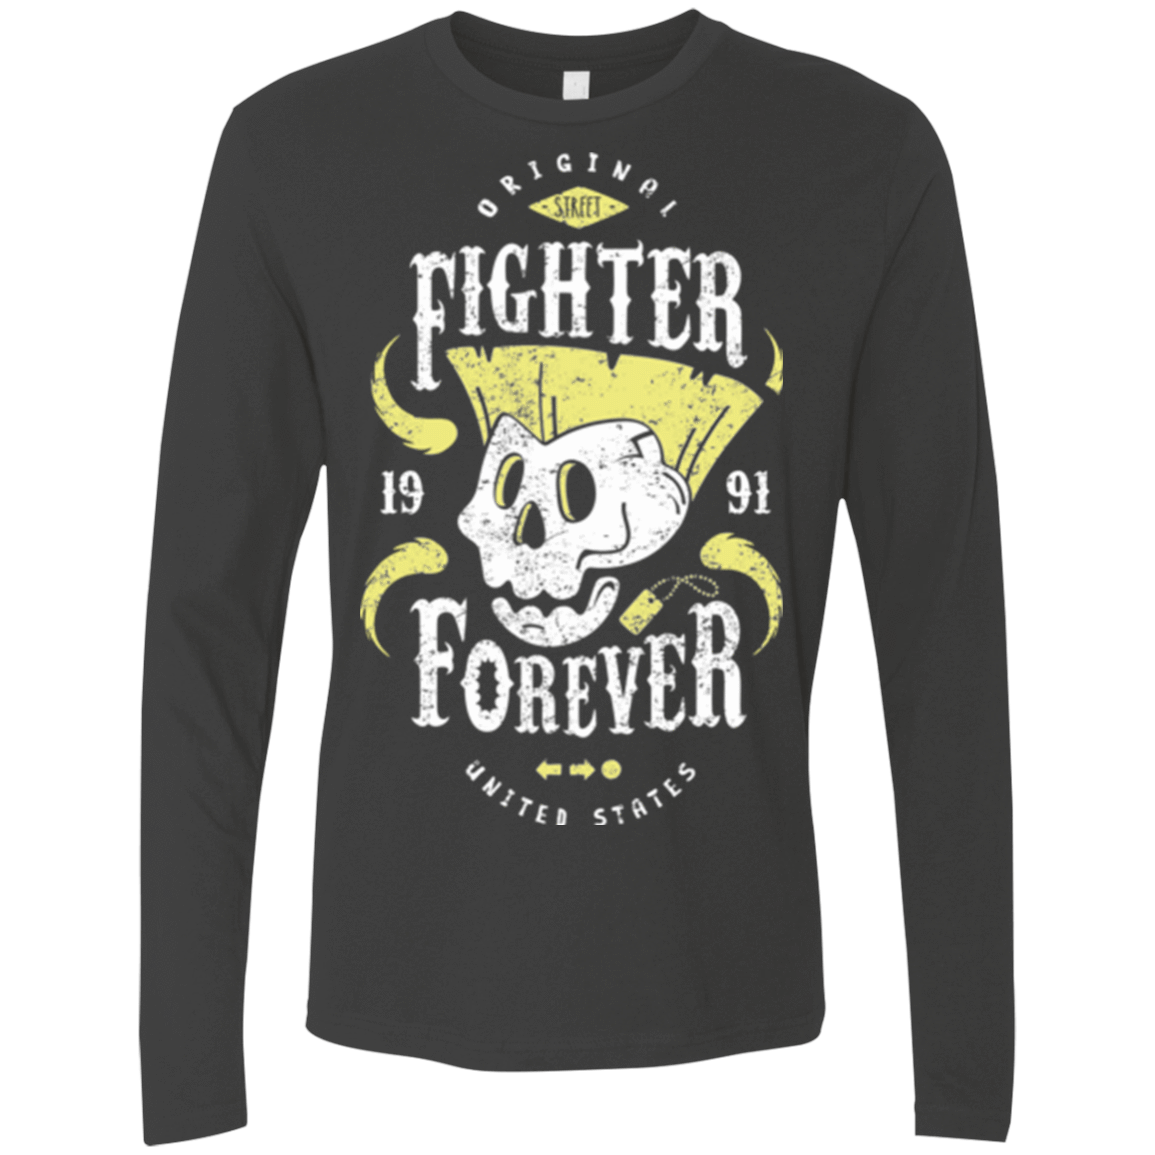 T-Shirts Heavy Metal / Small Fighter Forever Guile Men's Premium Long Sleeve